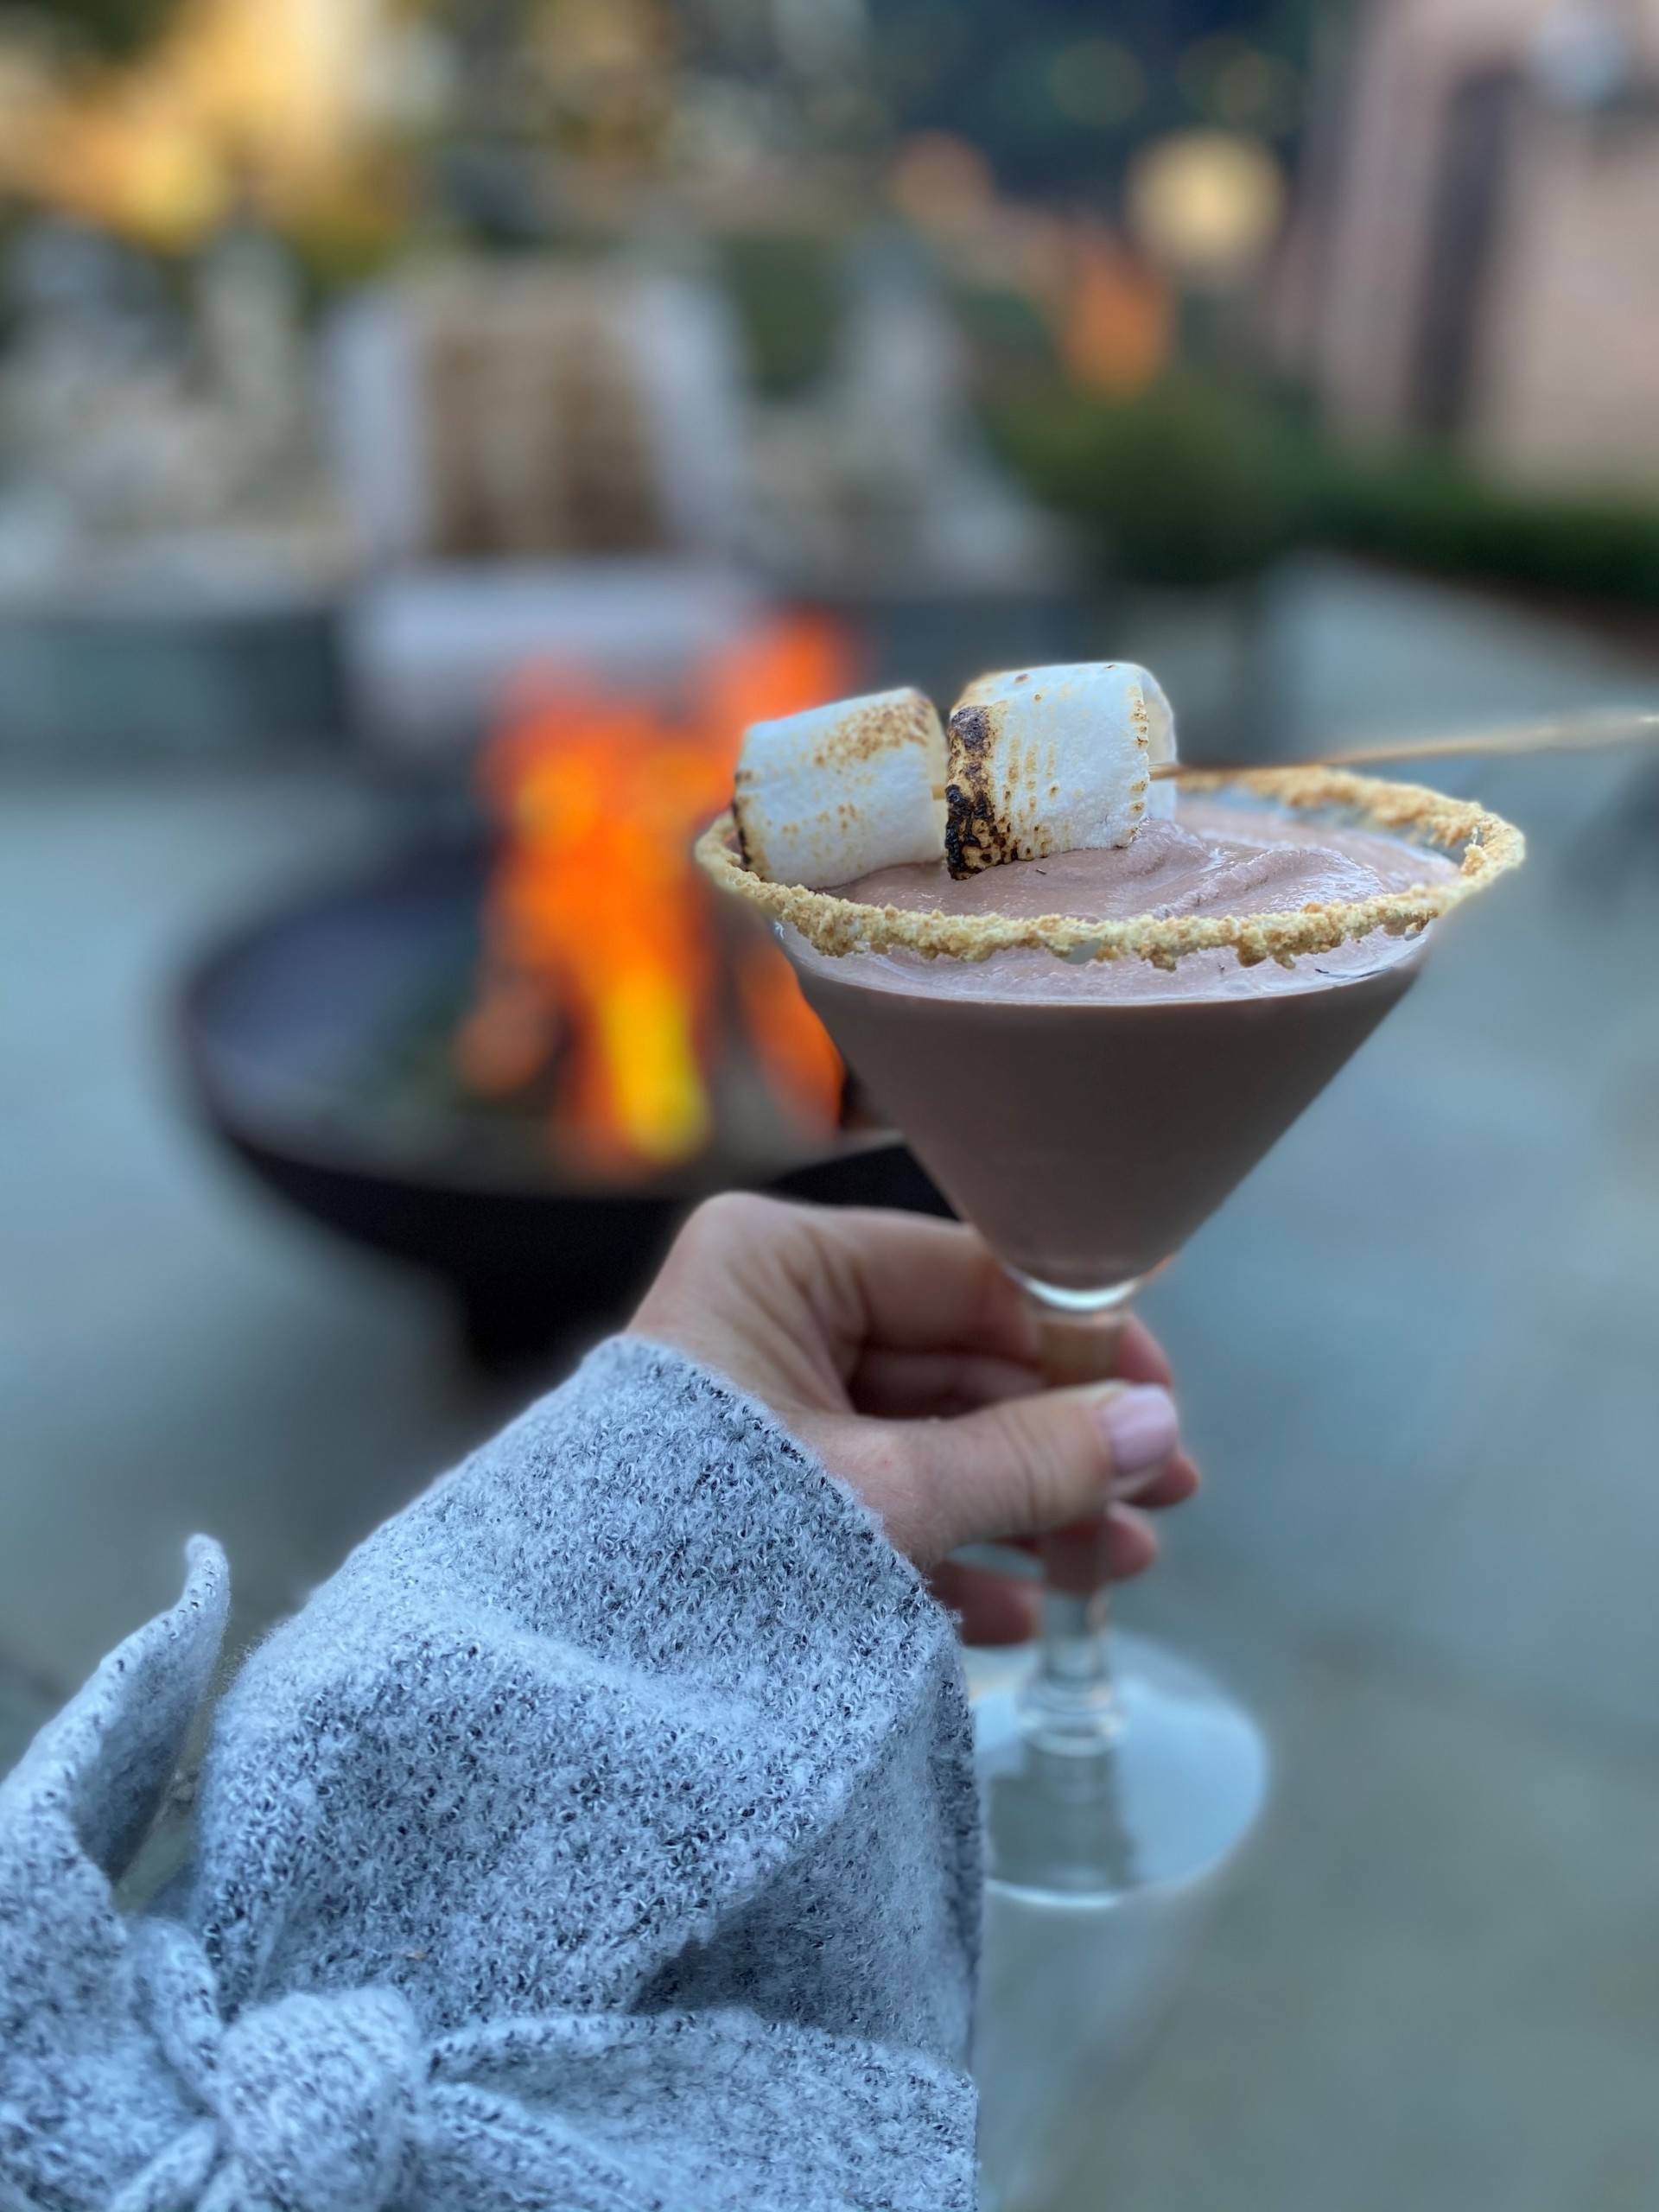 Ring In The New Year With A S’Moretini Around The Fire Pit